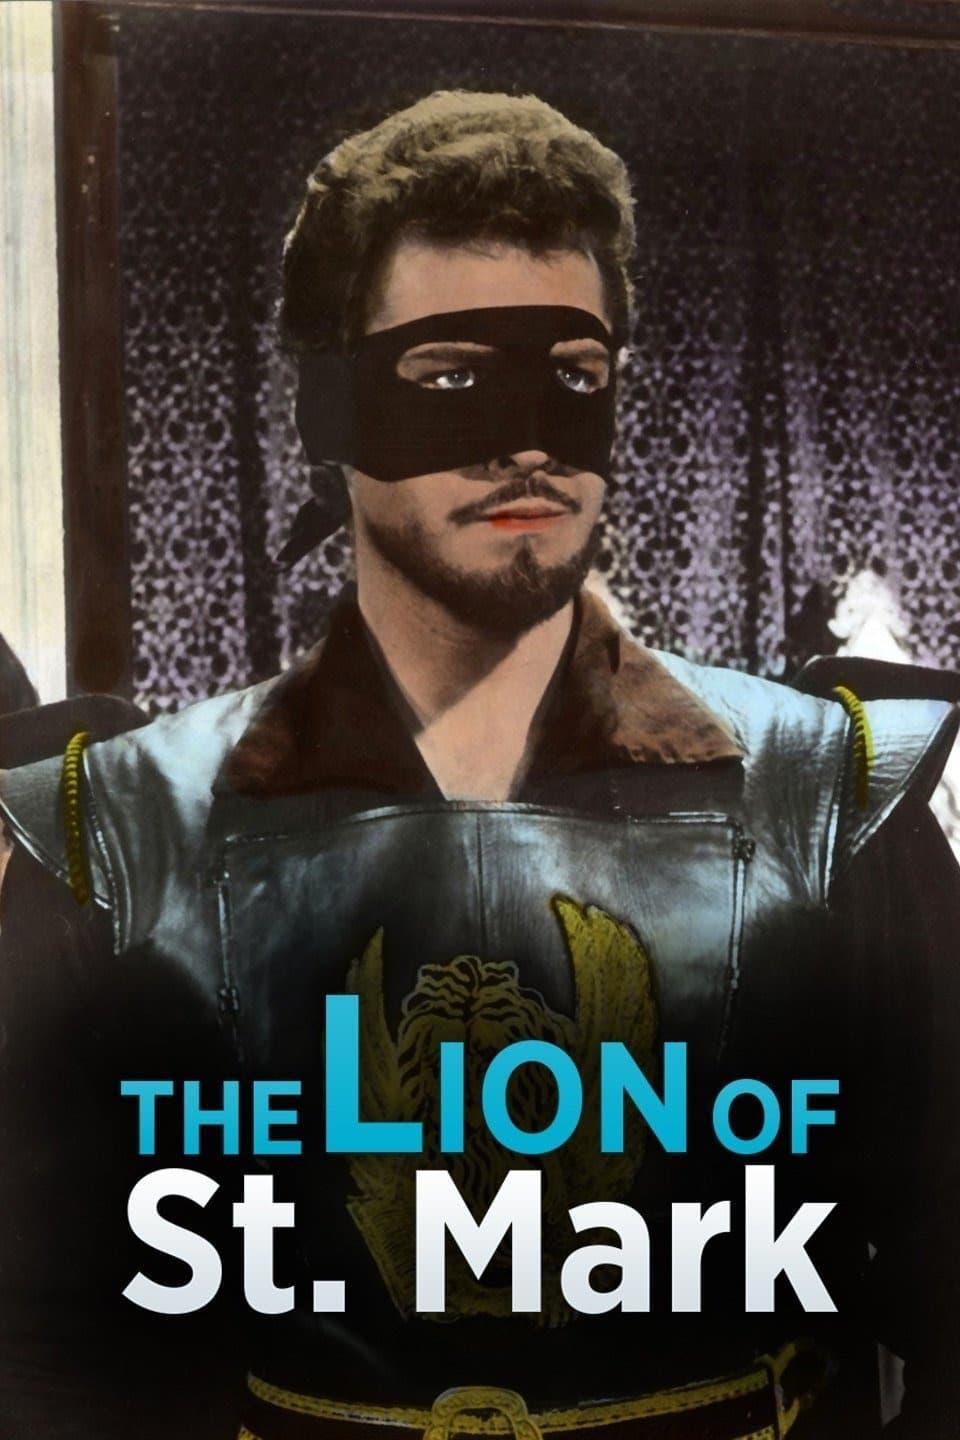 The Lion of St. Mark poster